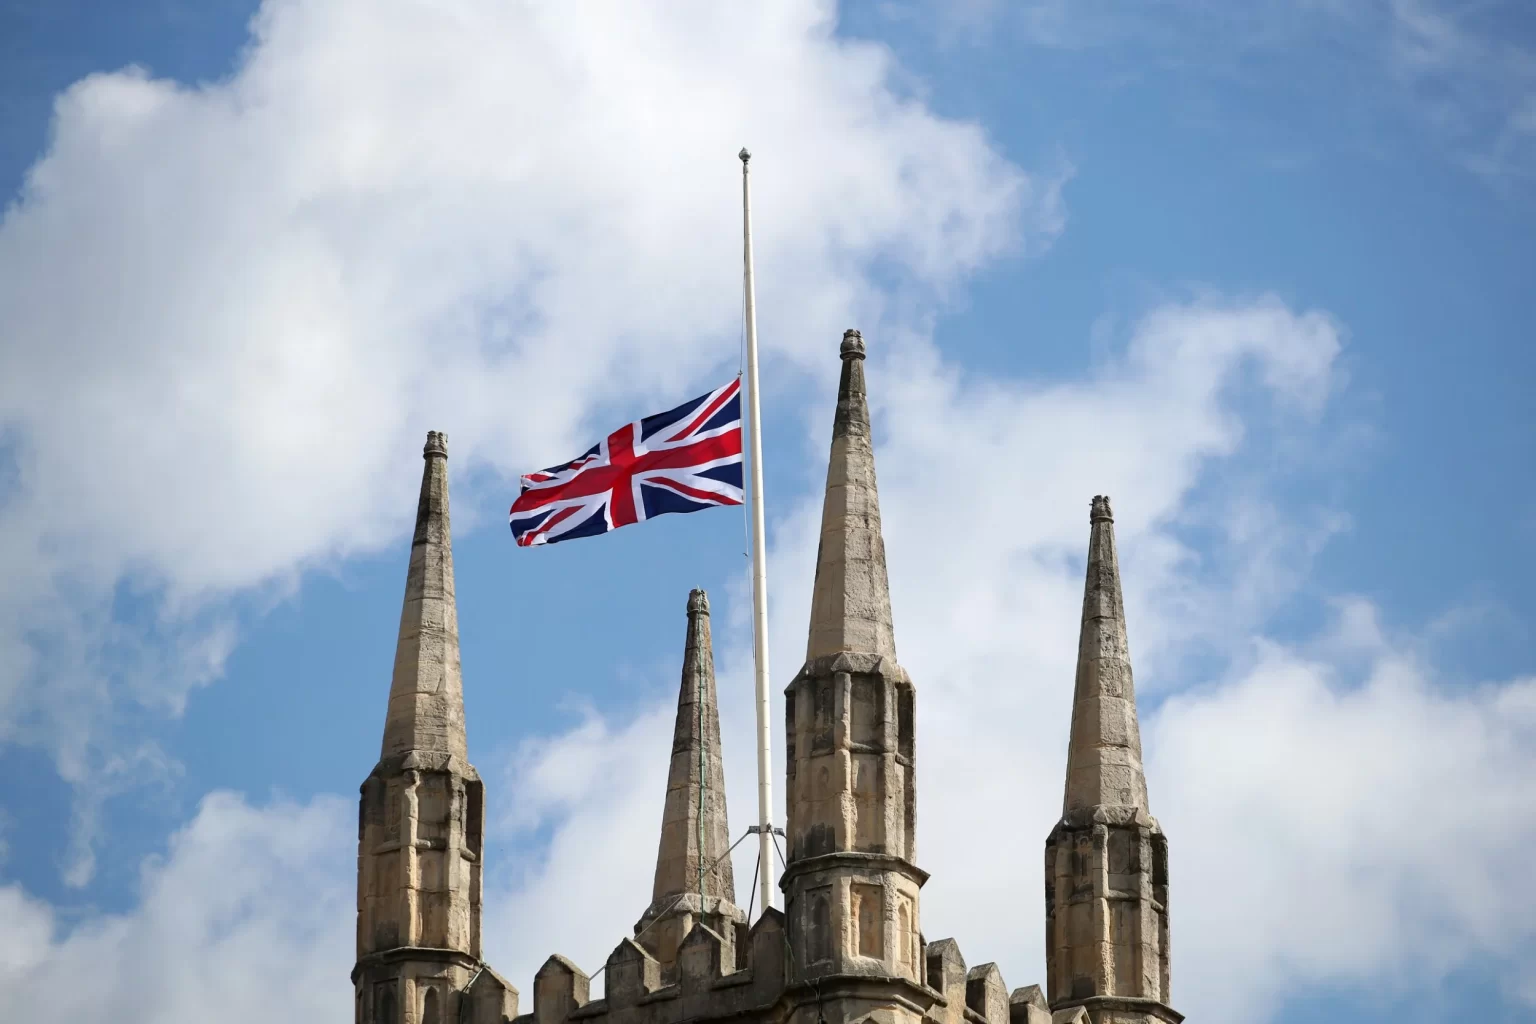 Flags return to full mast as national mourning period ends